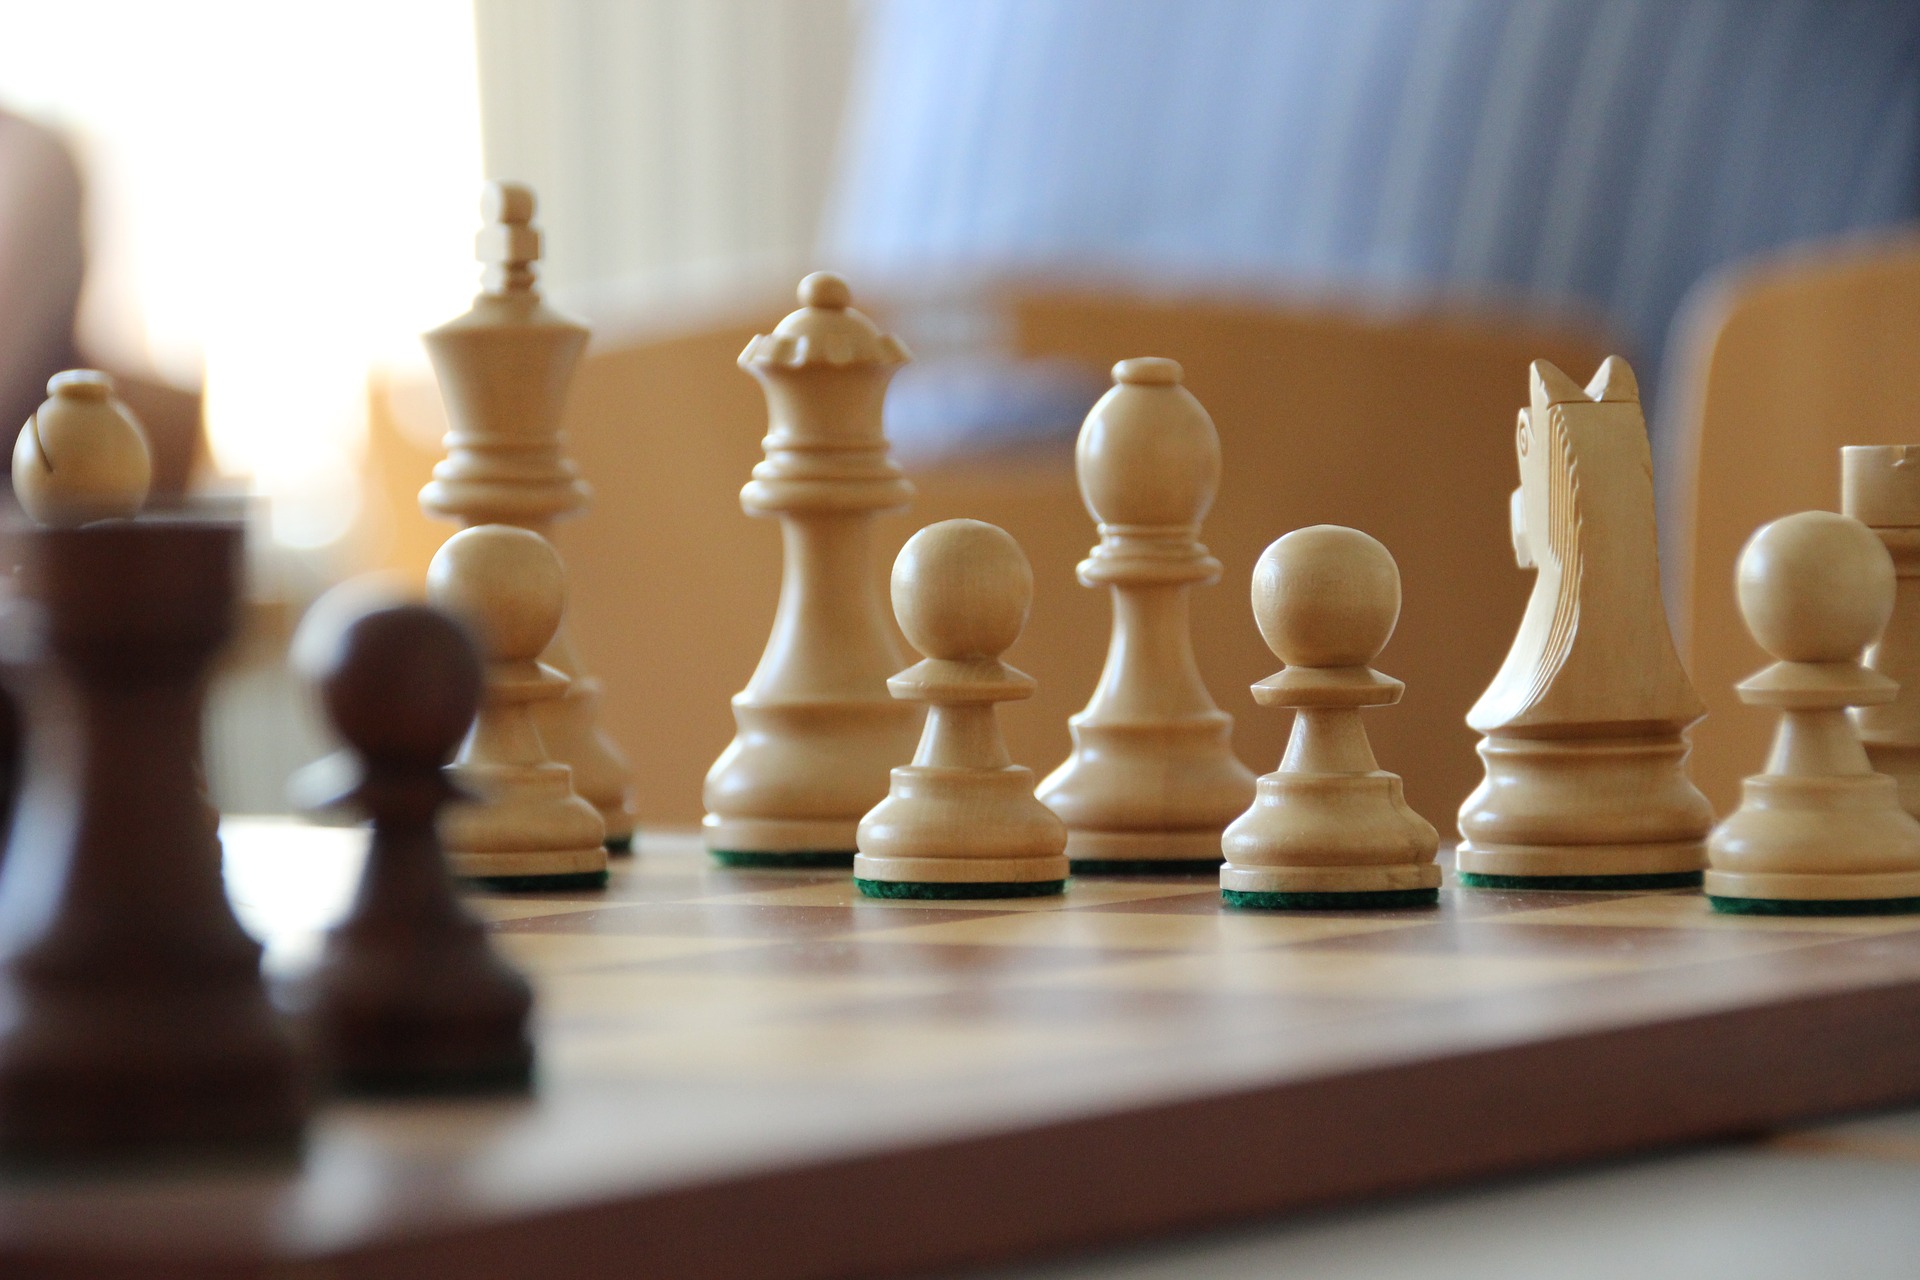 Exercise and Sports Nutrition for CHESS - The Barbell